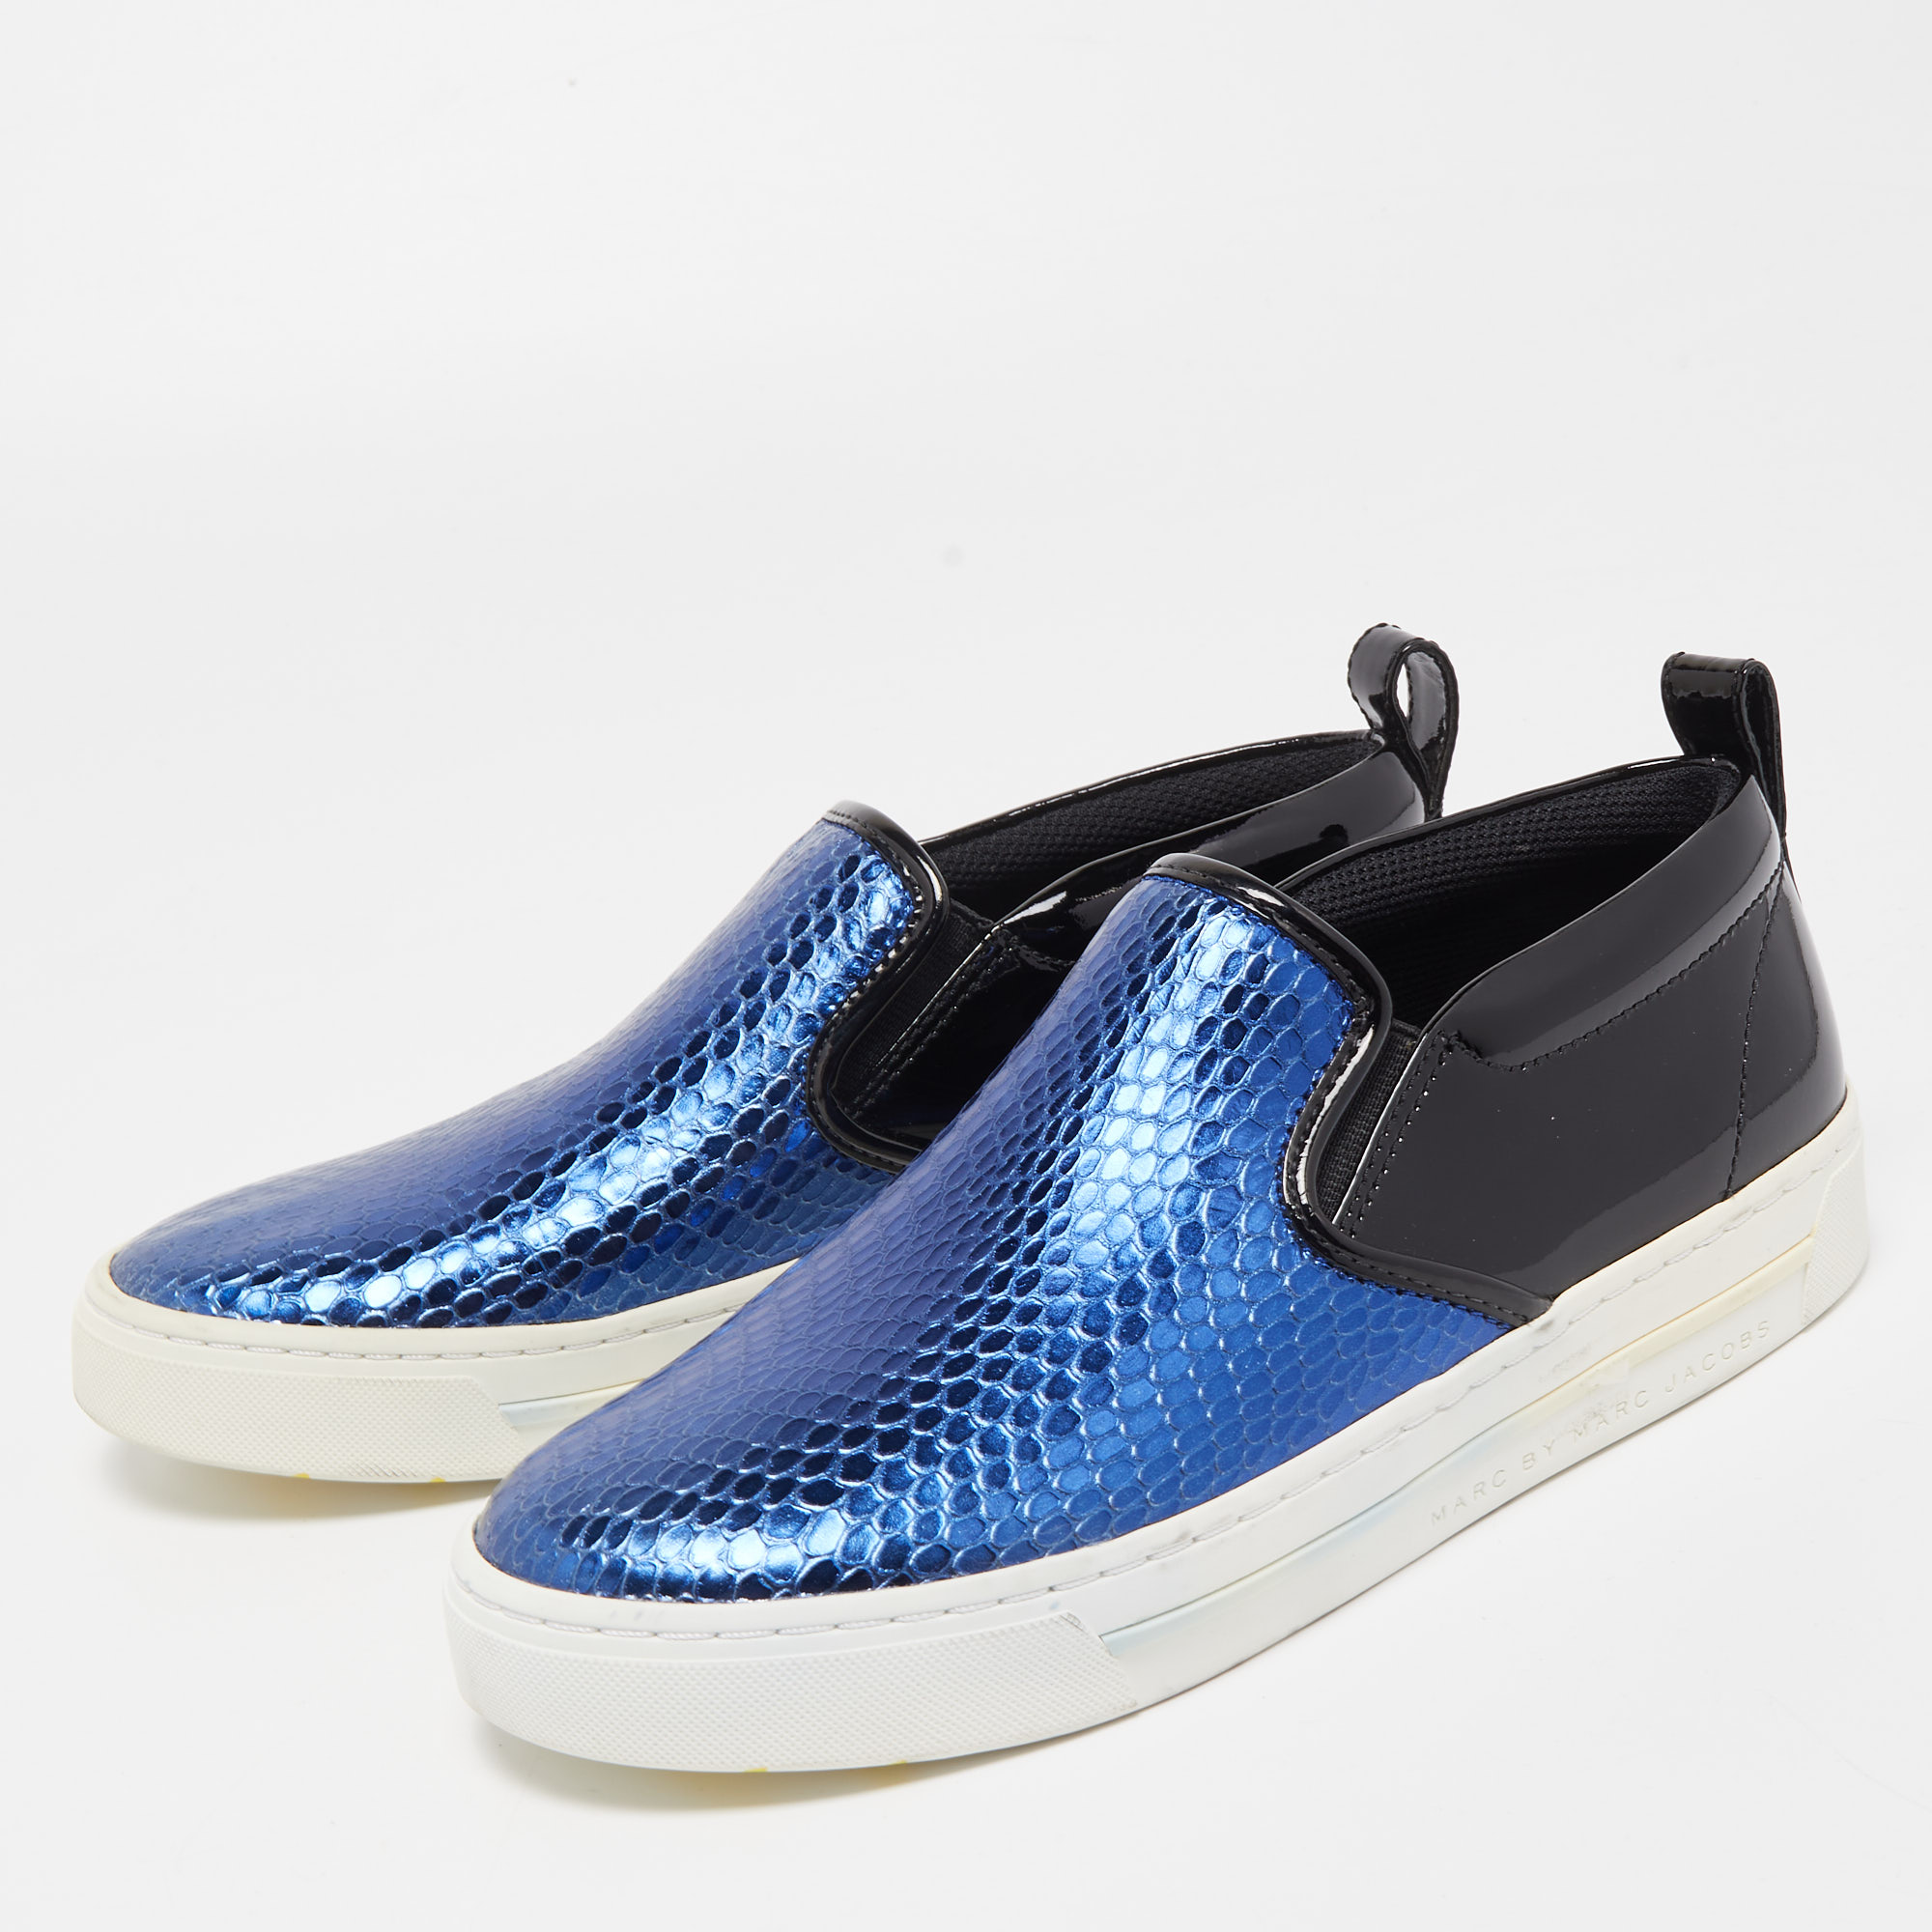 

Marc by Marc Jacobs Blue/Black Python Embossed Leather And Patent Leather Broome Slip On Sneakers Size